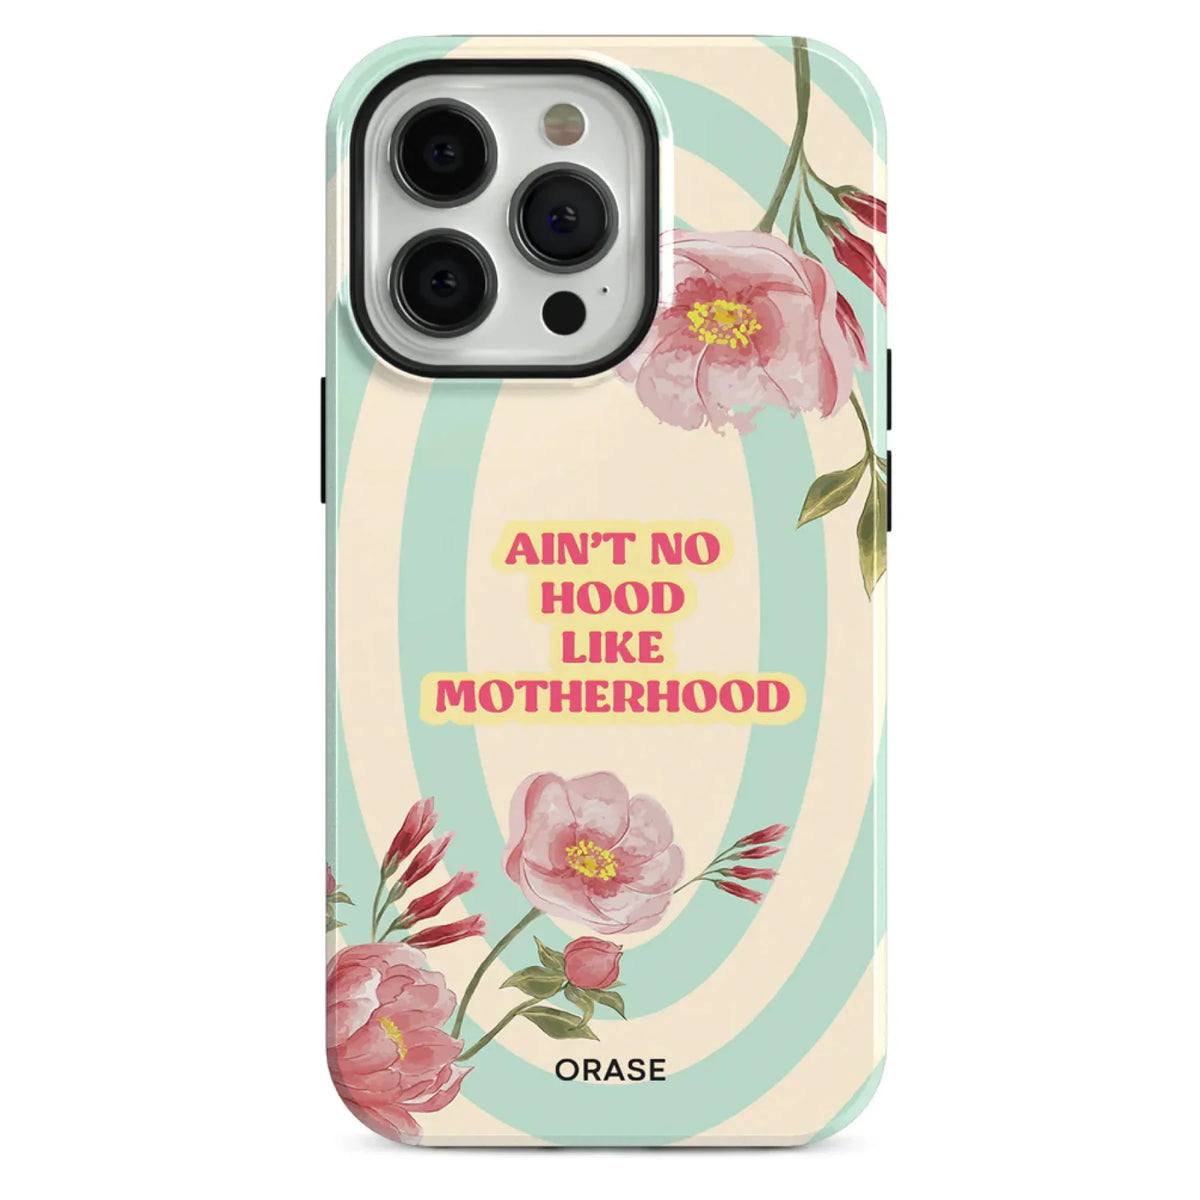 Ain't No Hood iPhone Case - Select a Device